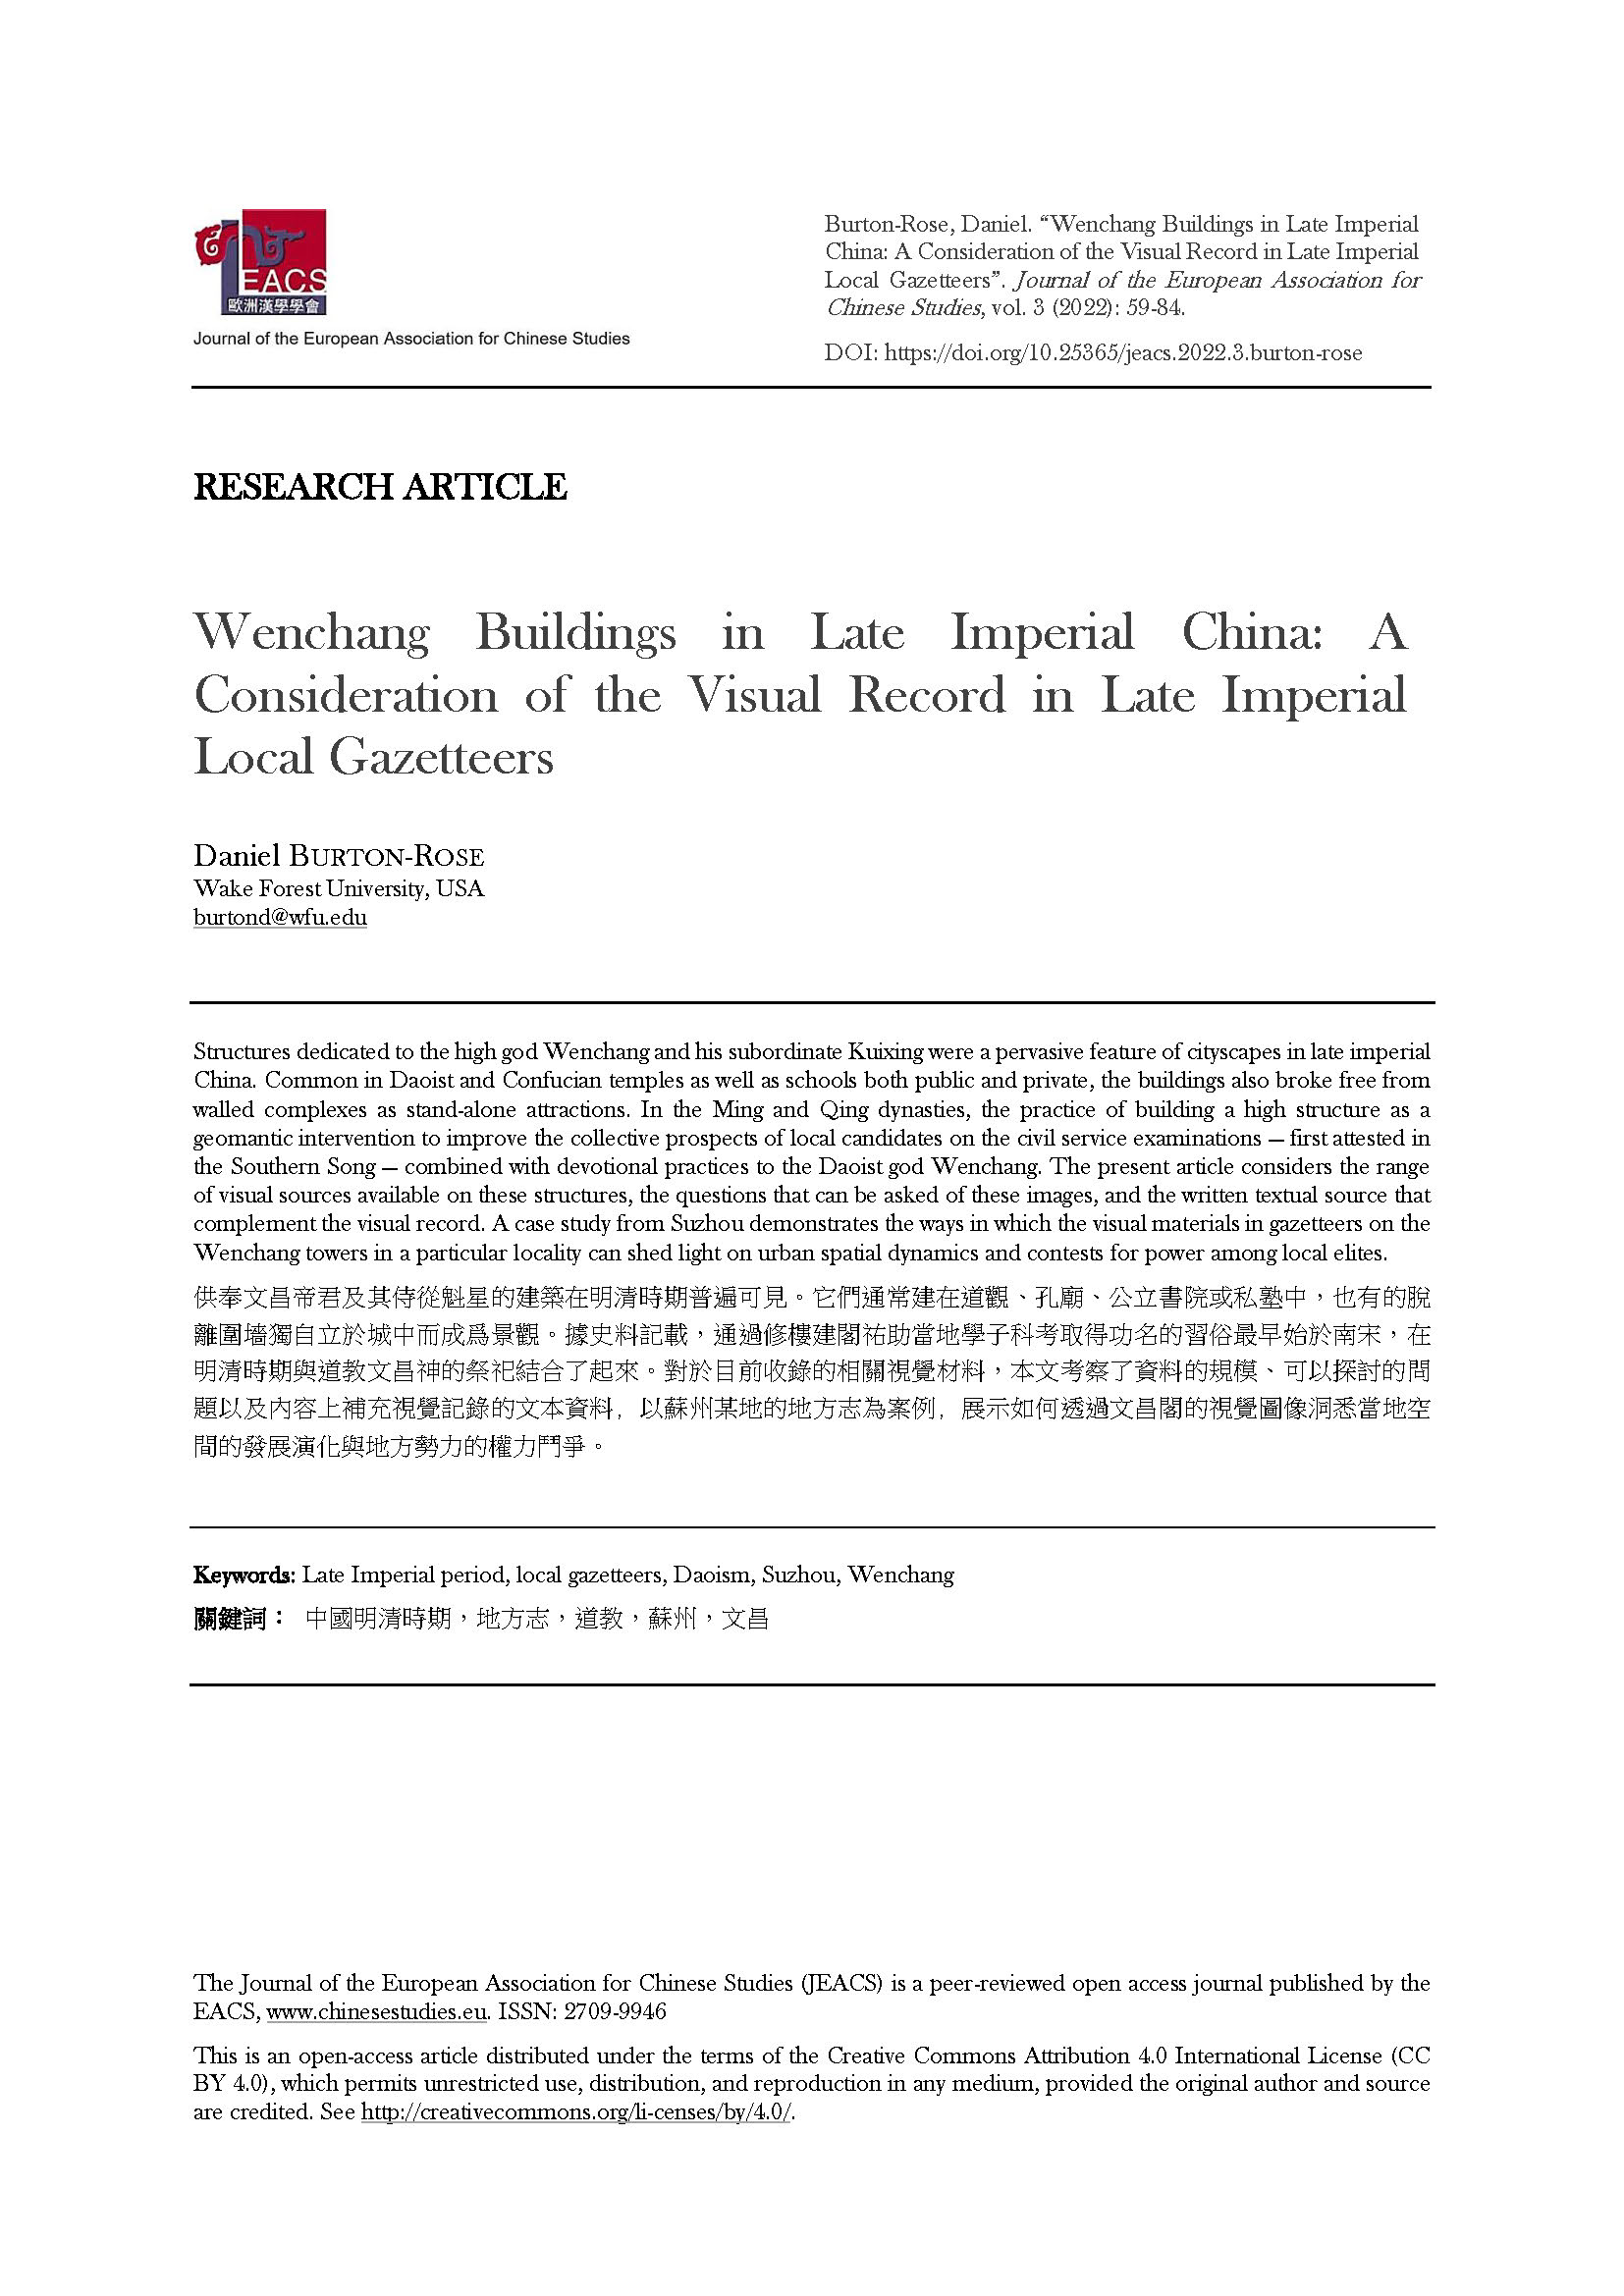 Burton-Rose: Wenchang Buildings in Late Imperial China